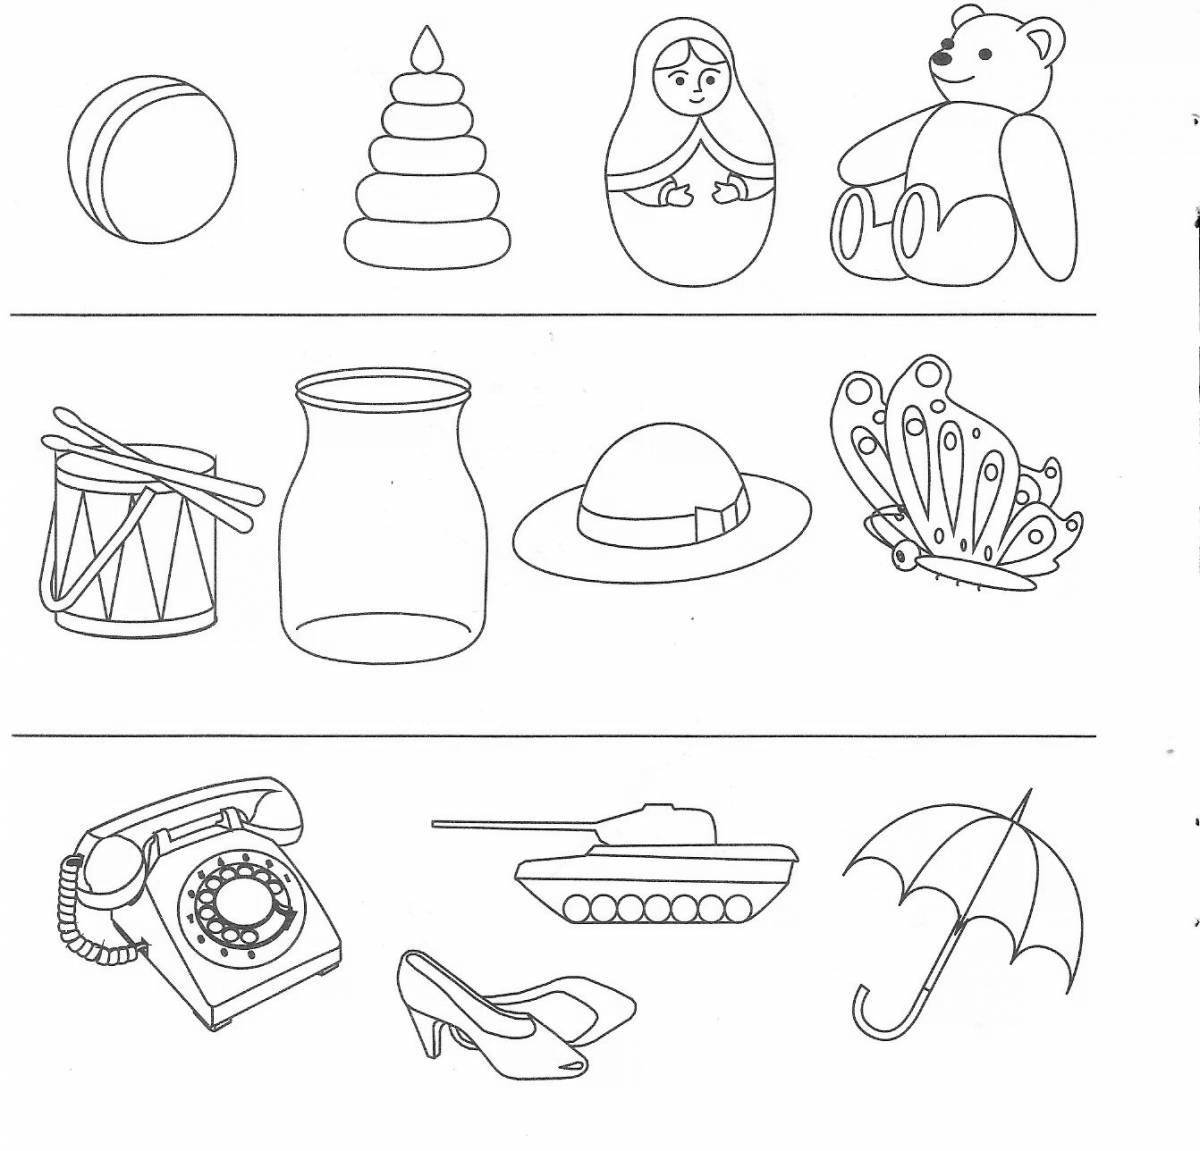 Colourful coloring pages for little explorers